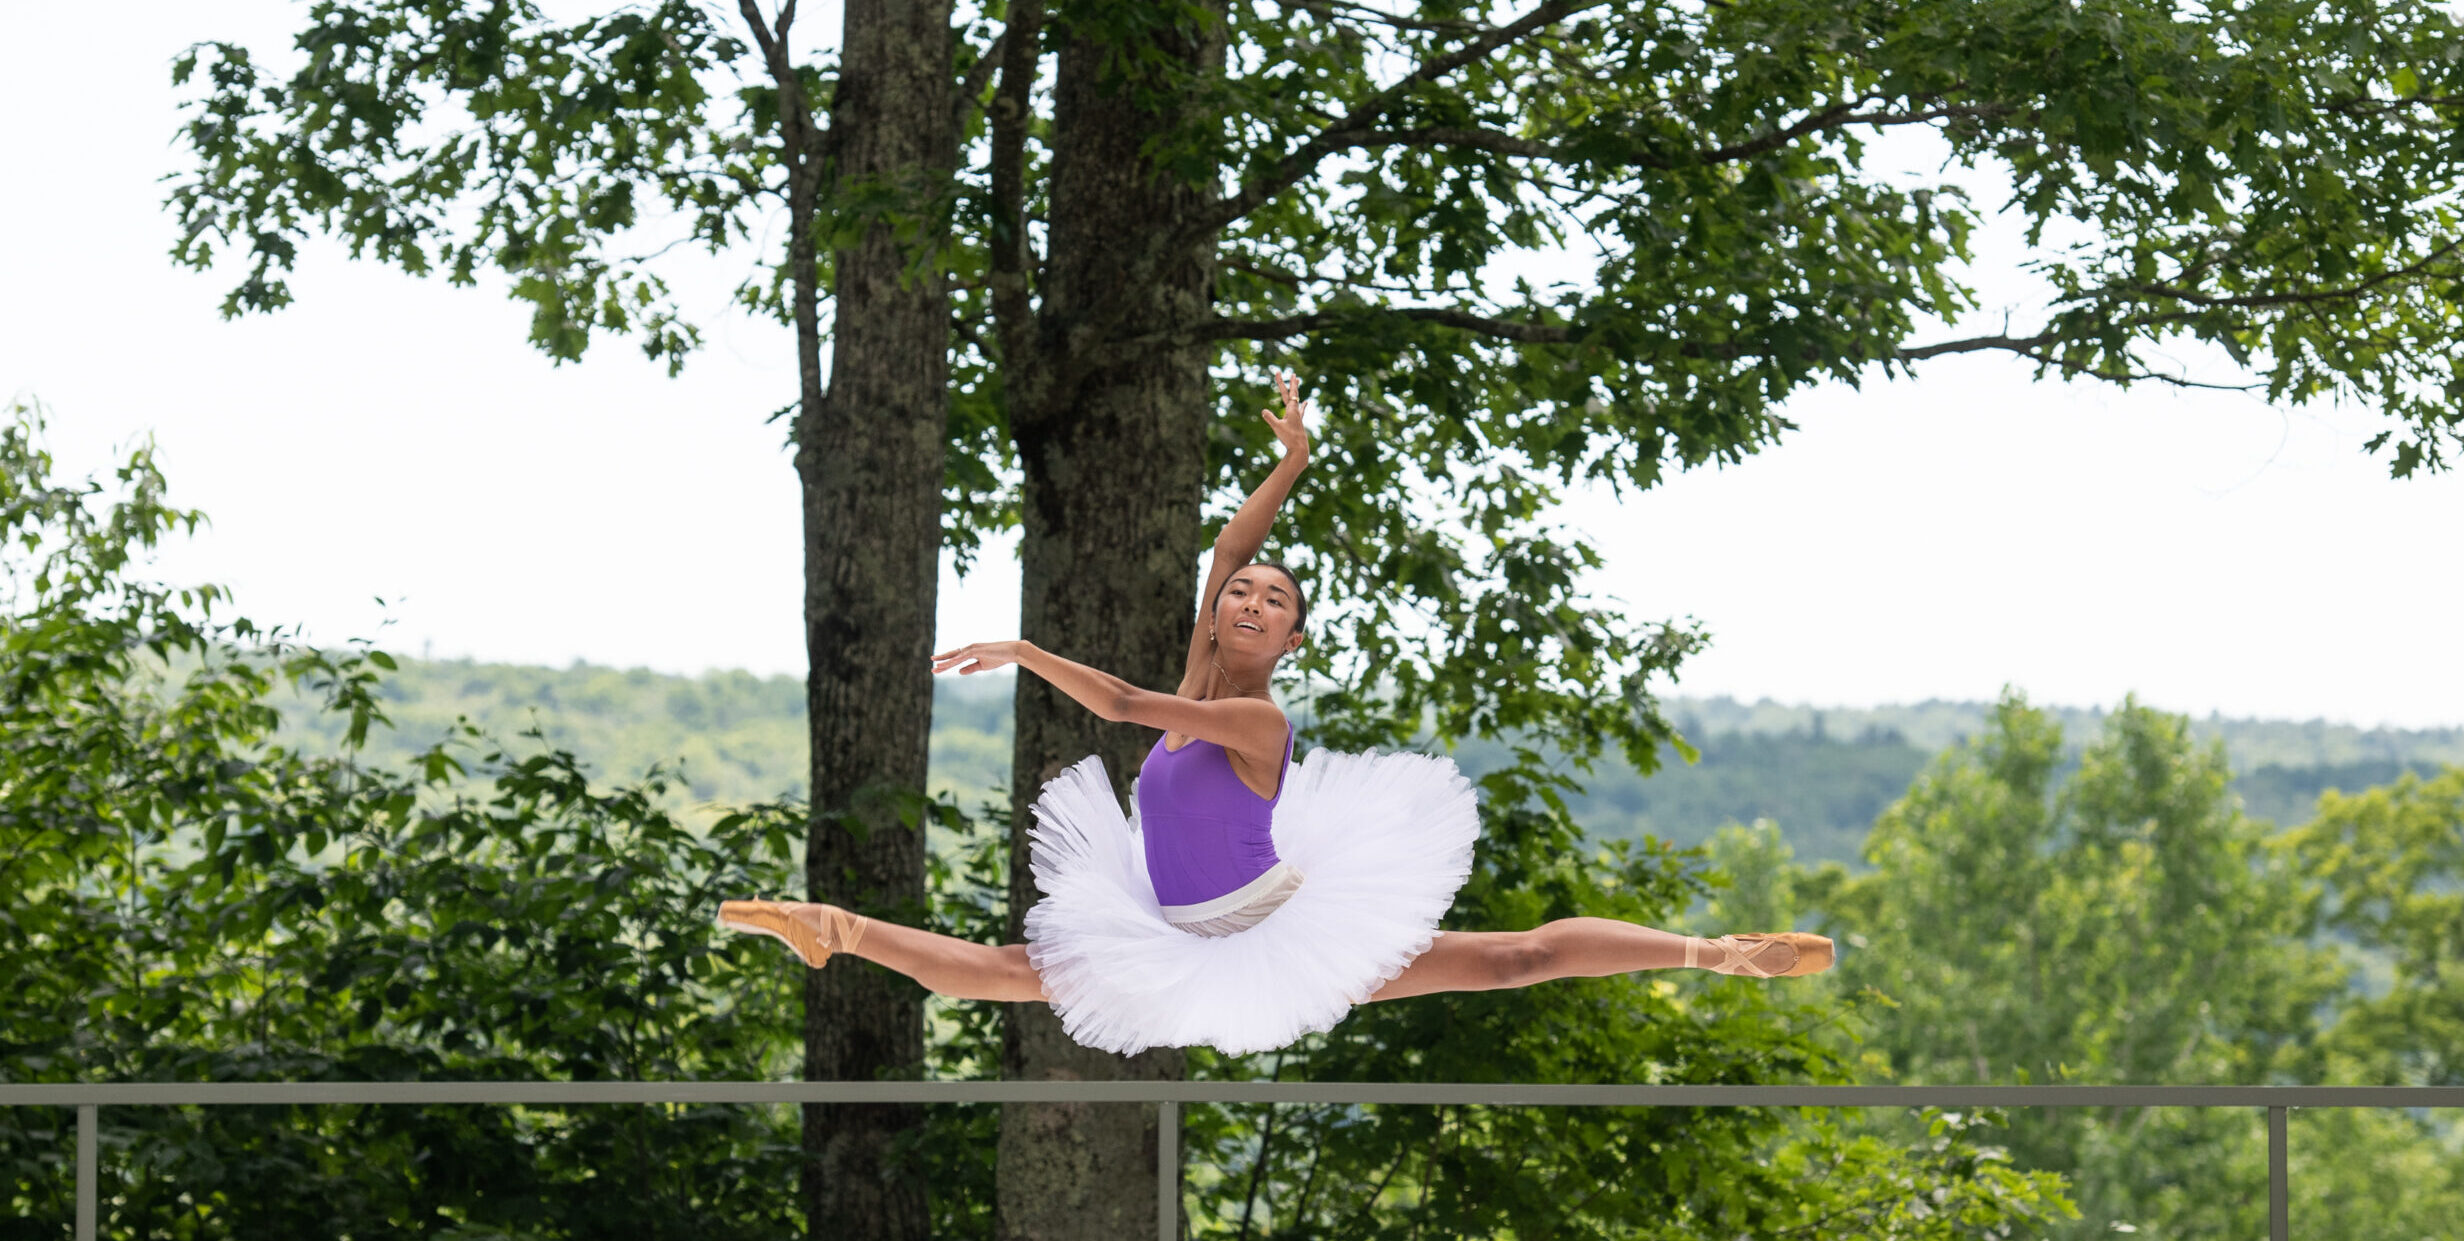 At an outdoor performance space, a young female dancer in a purple leotard, white pancake tutu and pointe shoes does a flying saut de chat in front of trees.